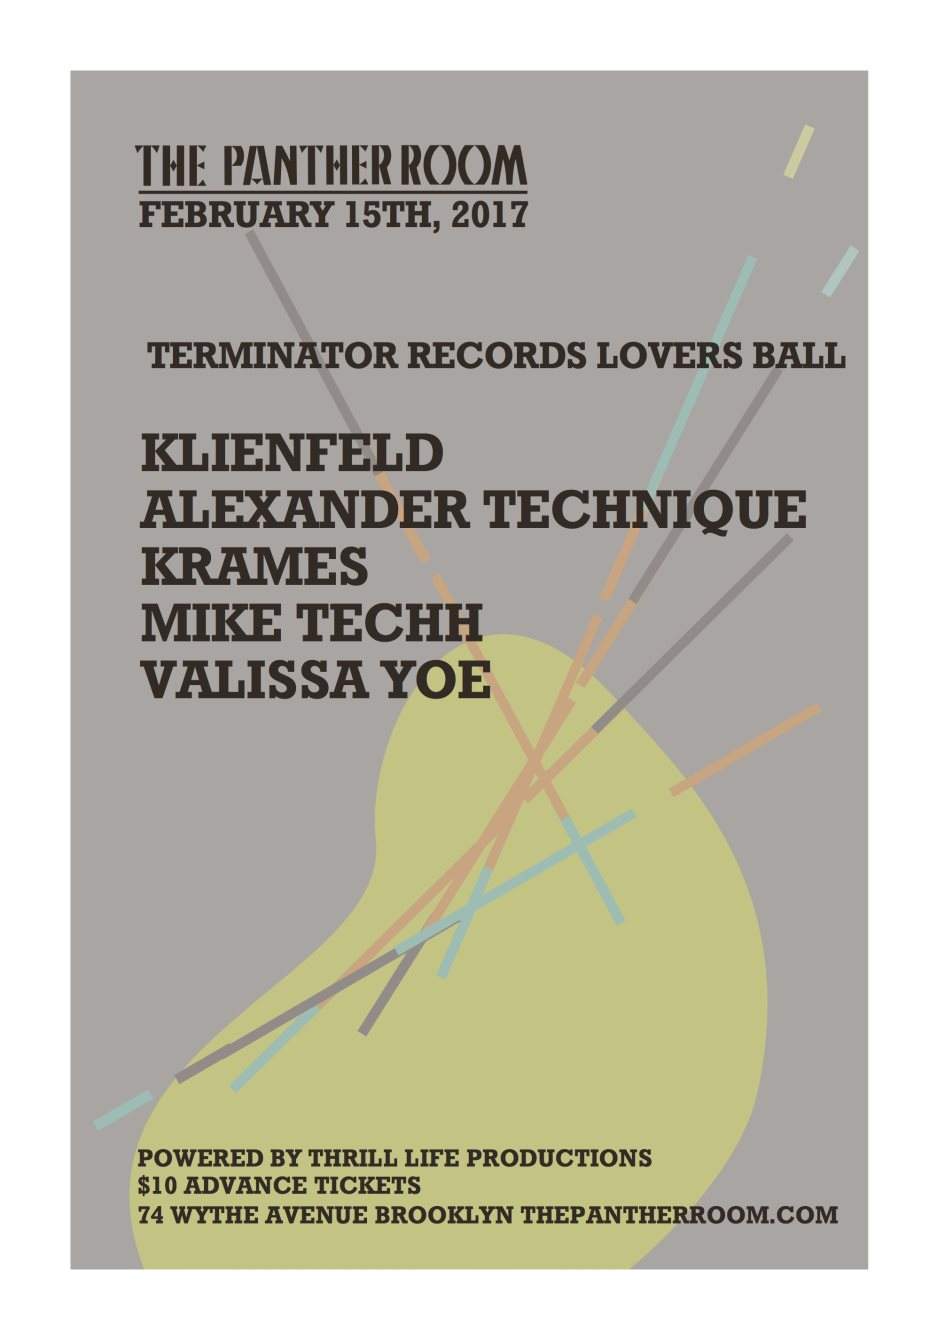 Terminator Records Lovers Ball in The Panther Room - フライヤー表